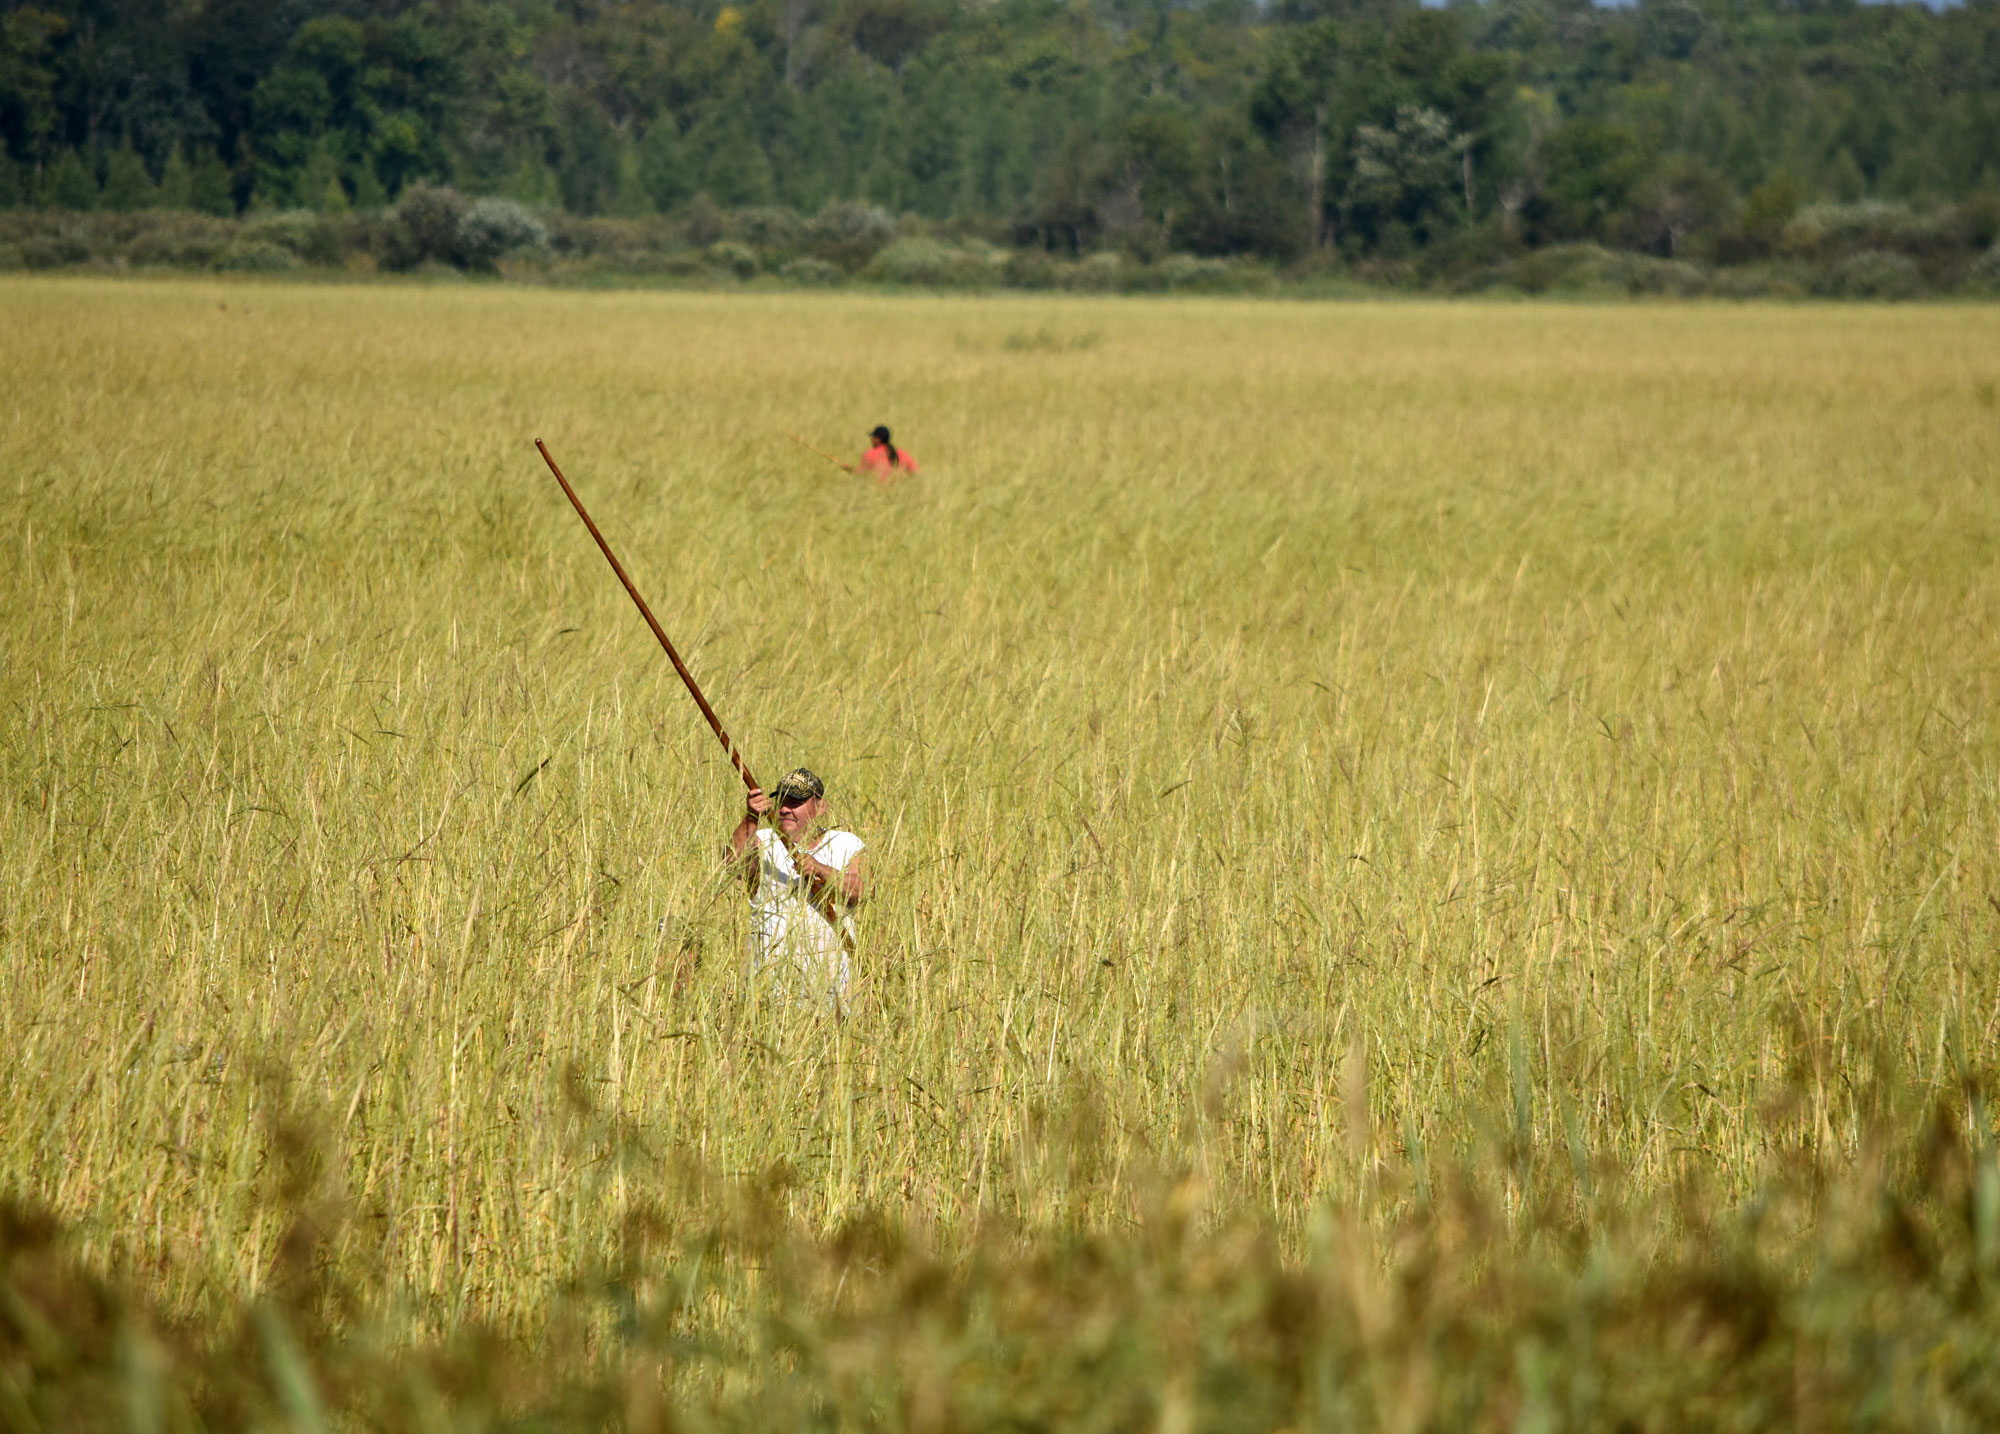 Photograph of a bed of people harvesting wild rice in Minnesota. The photo shows a dense bed of wild rice plants. The plants are yellow in color. Two people can be seen standing in the rice holding poles. Although not seen, they are using the poles to steer boats through the rice, while another person in the boat harvests it.